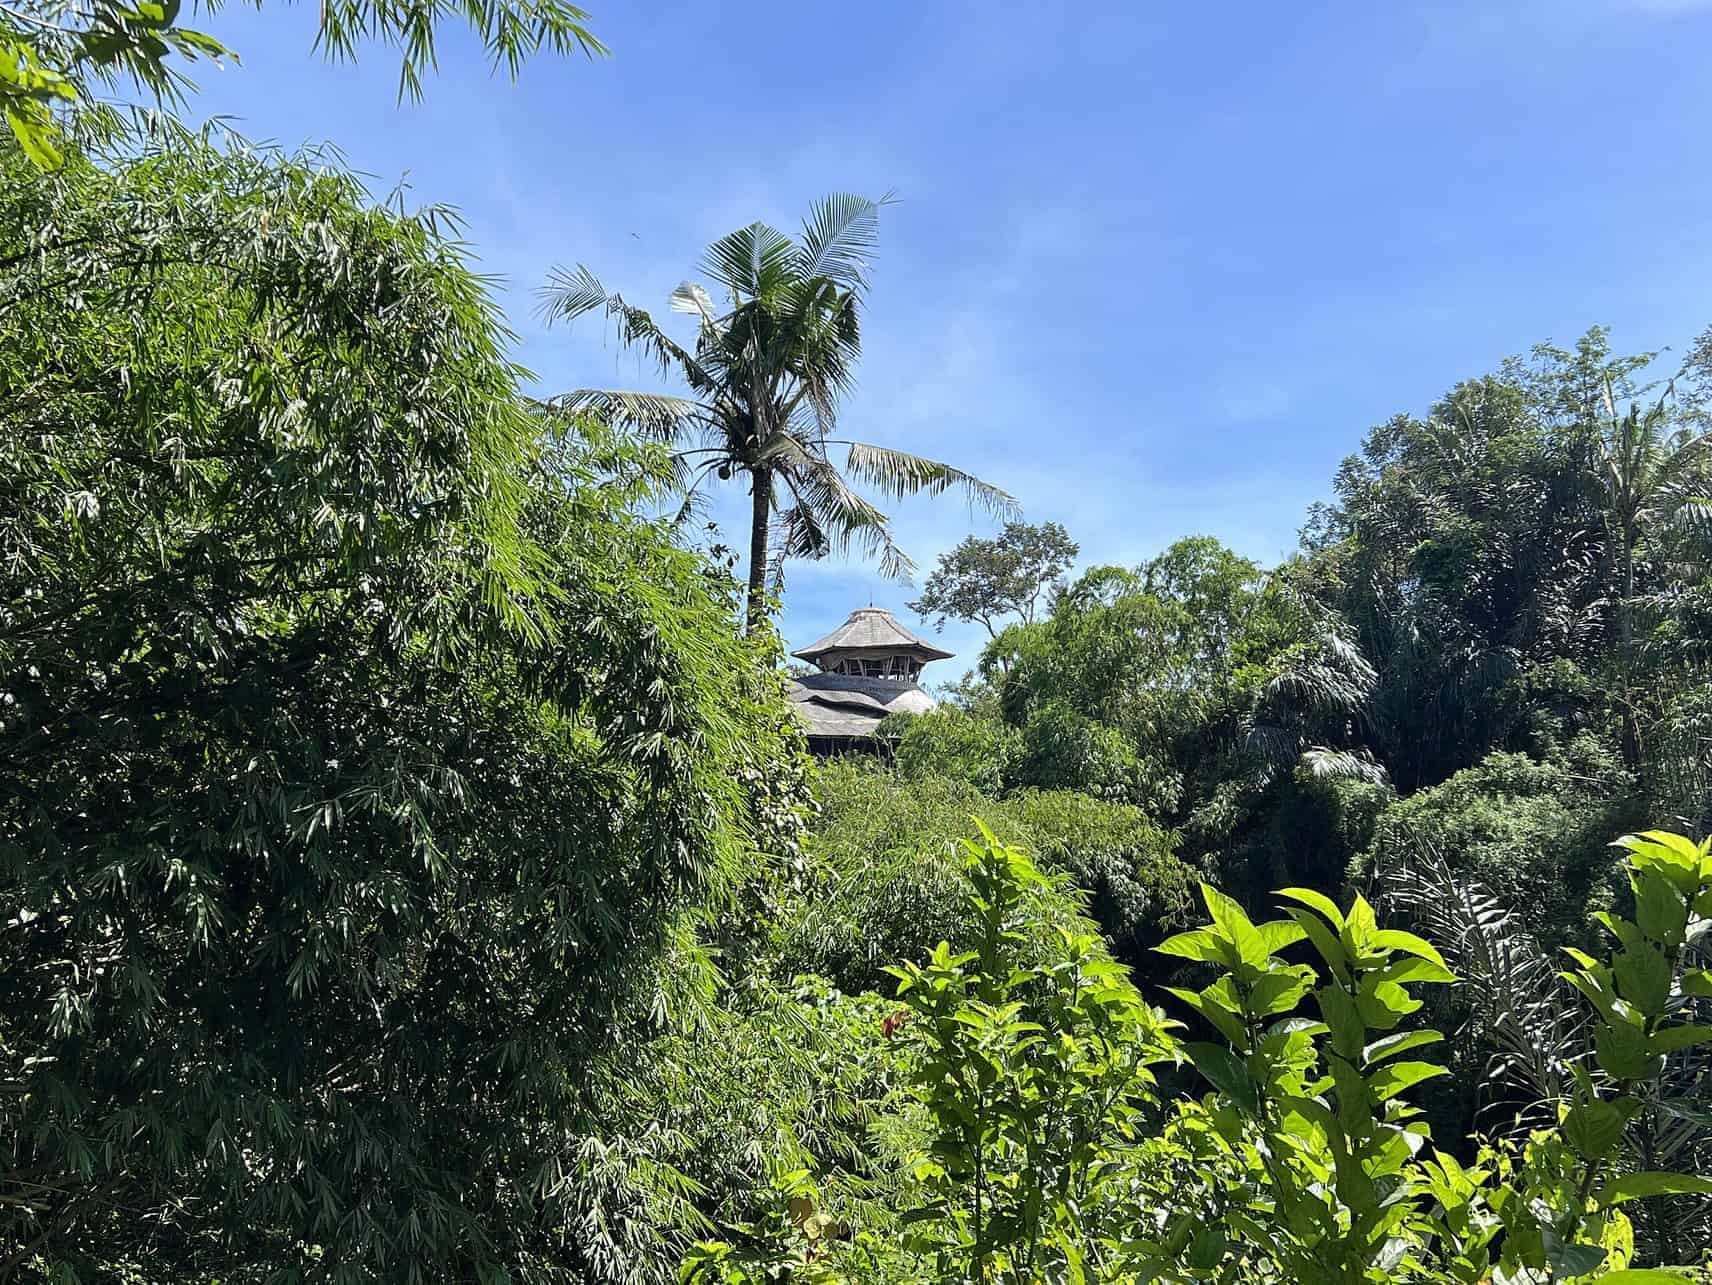 Bali travel tips - visit the beautiful Bali Forests